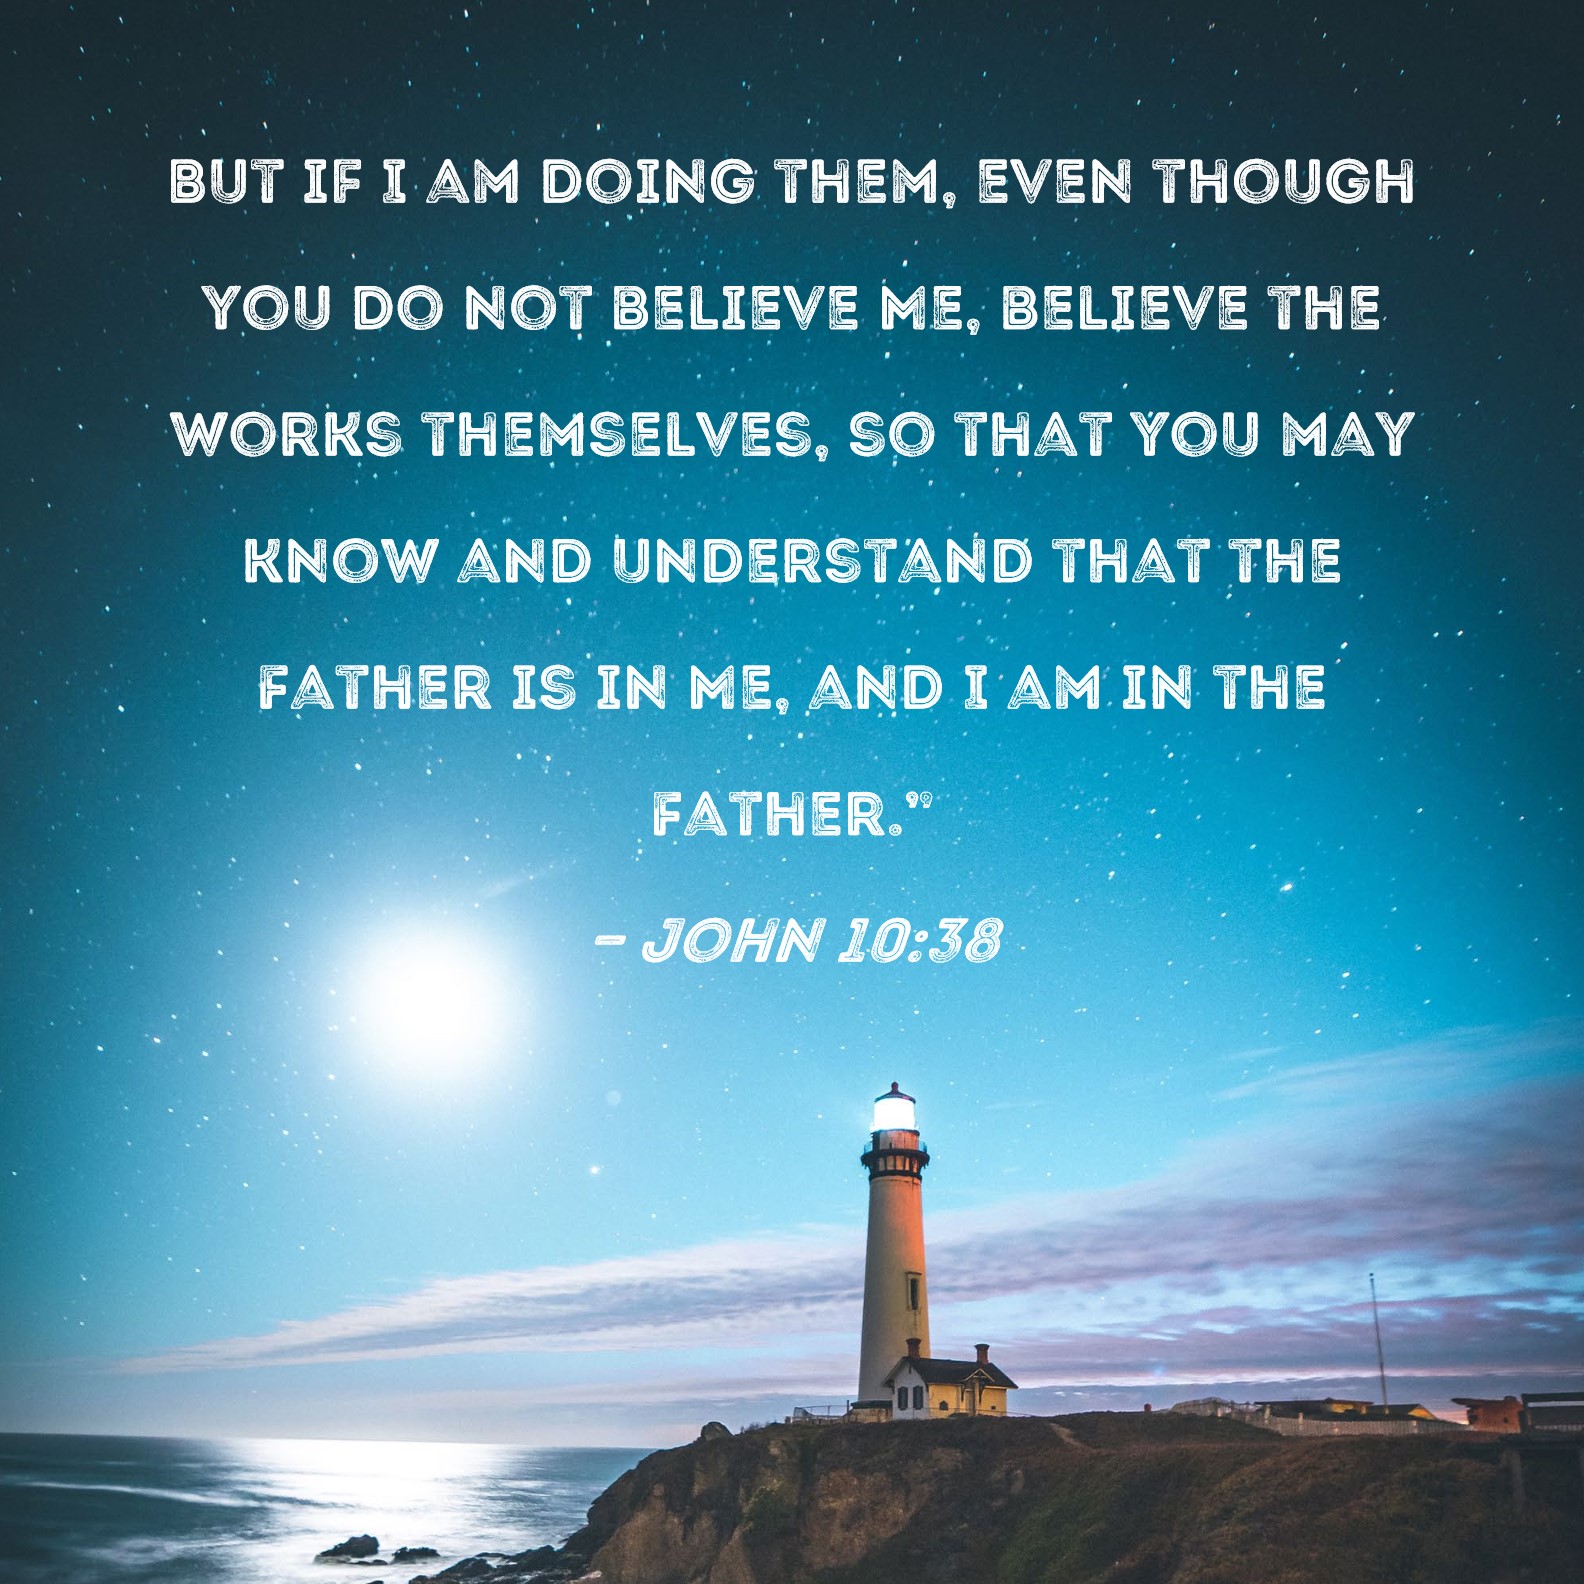 John 10:38 But if I am doing them, even though you do not believe Me, believe  the works themselves, so that you may know and understand that the Father is  in Me